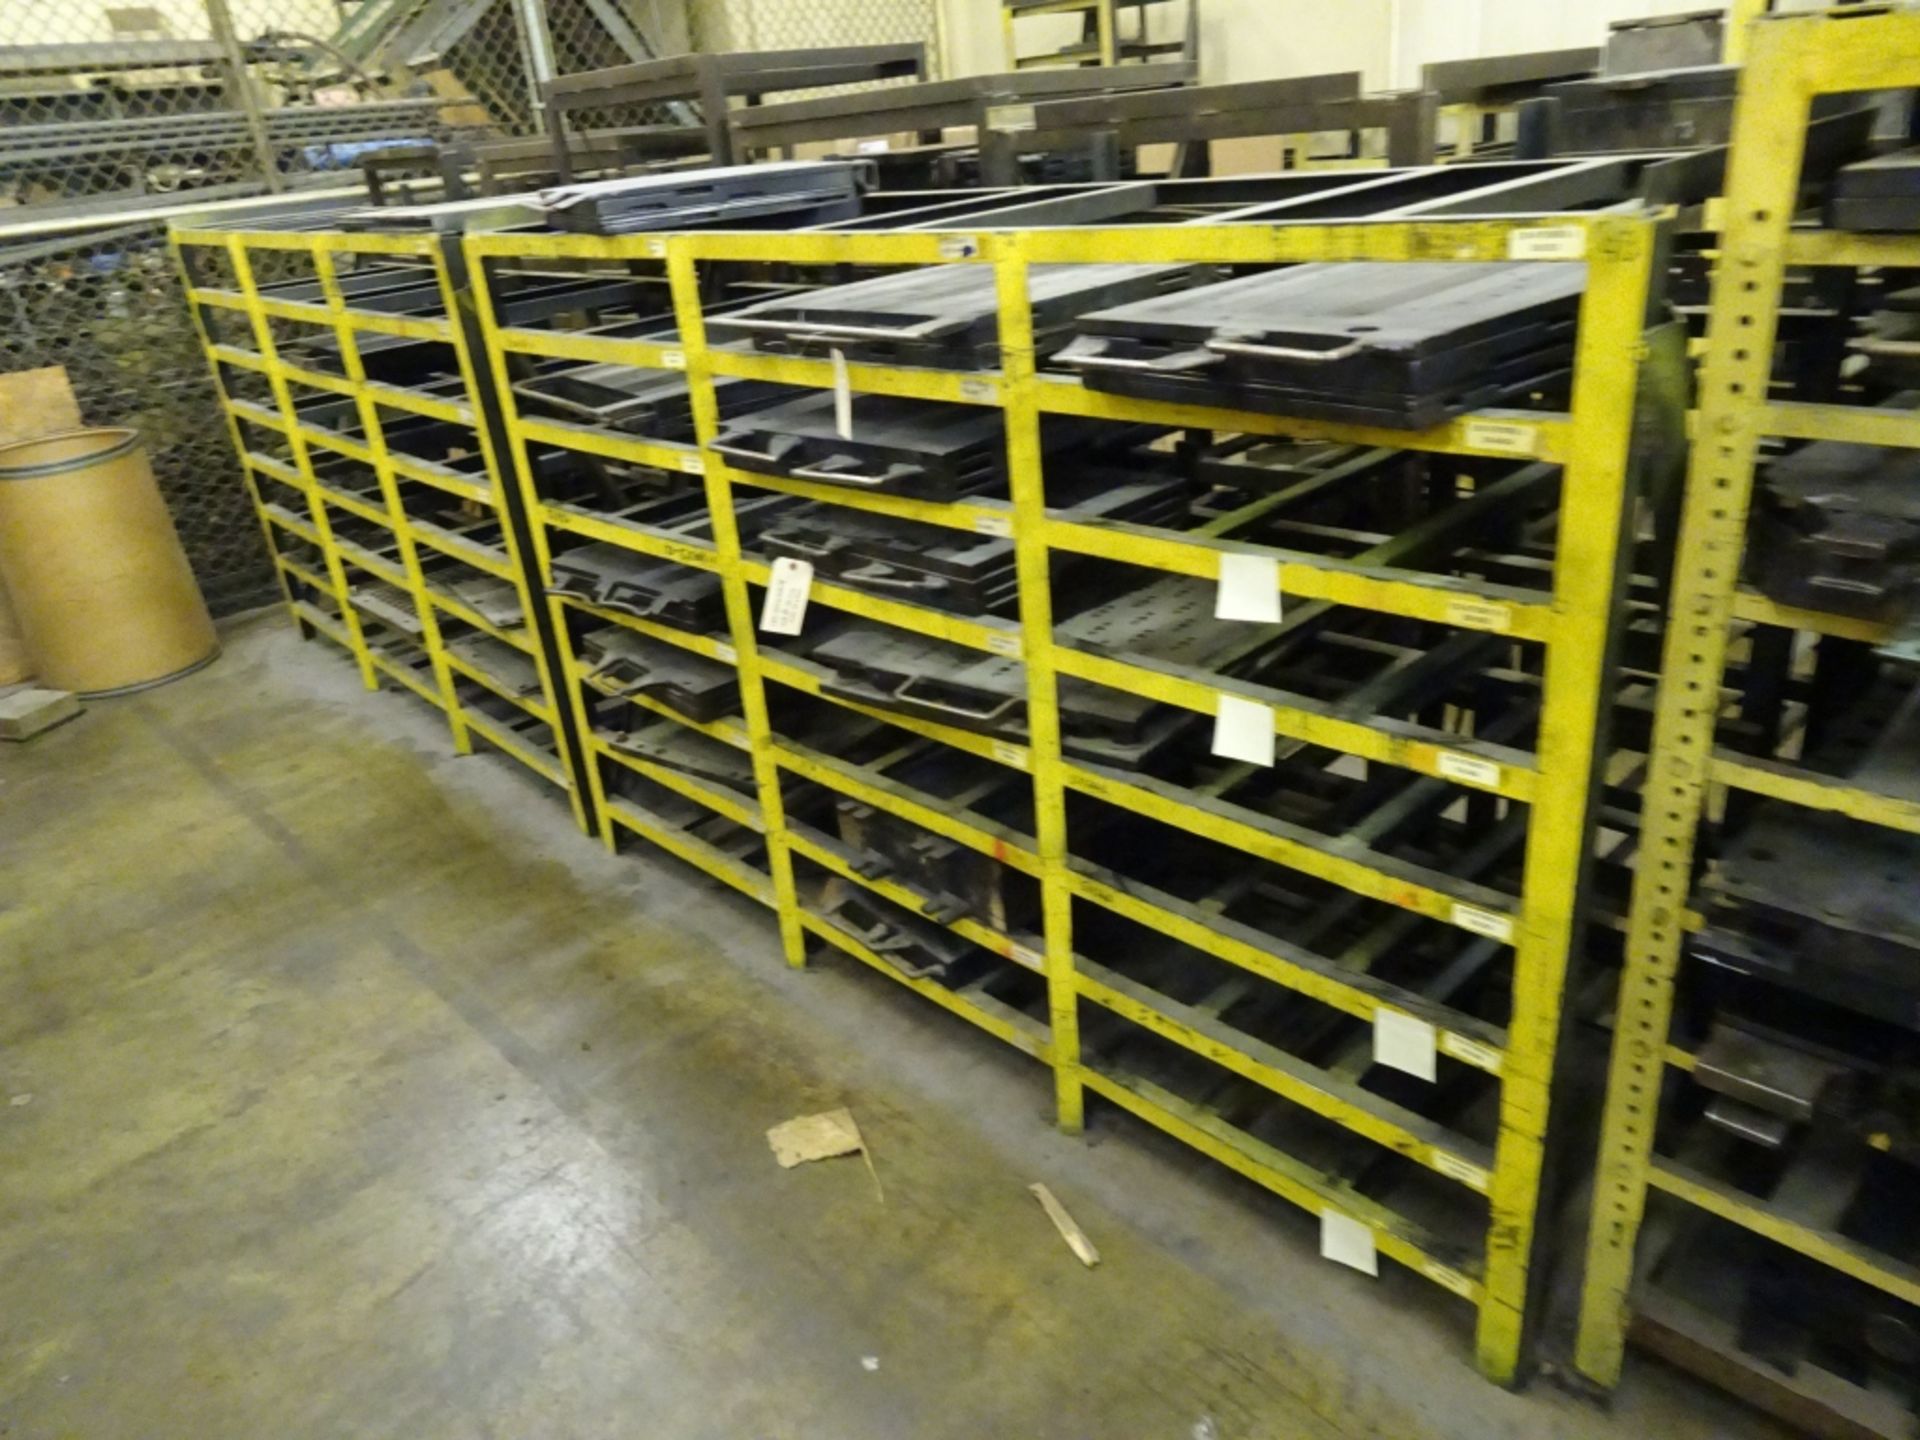 (13) Various Sized Heavy Duty Steel Mold Racks With No Contents - Image 6 of 6